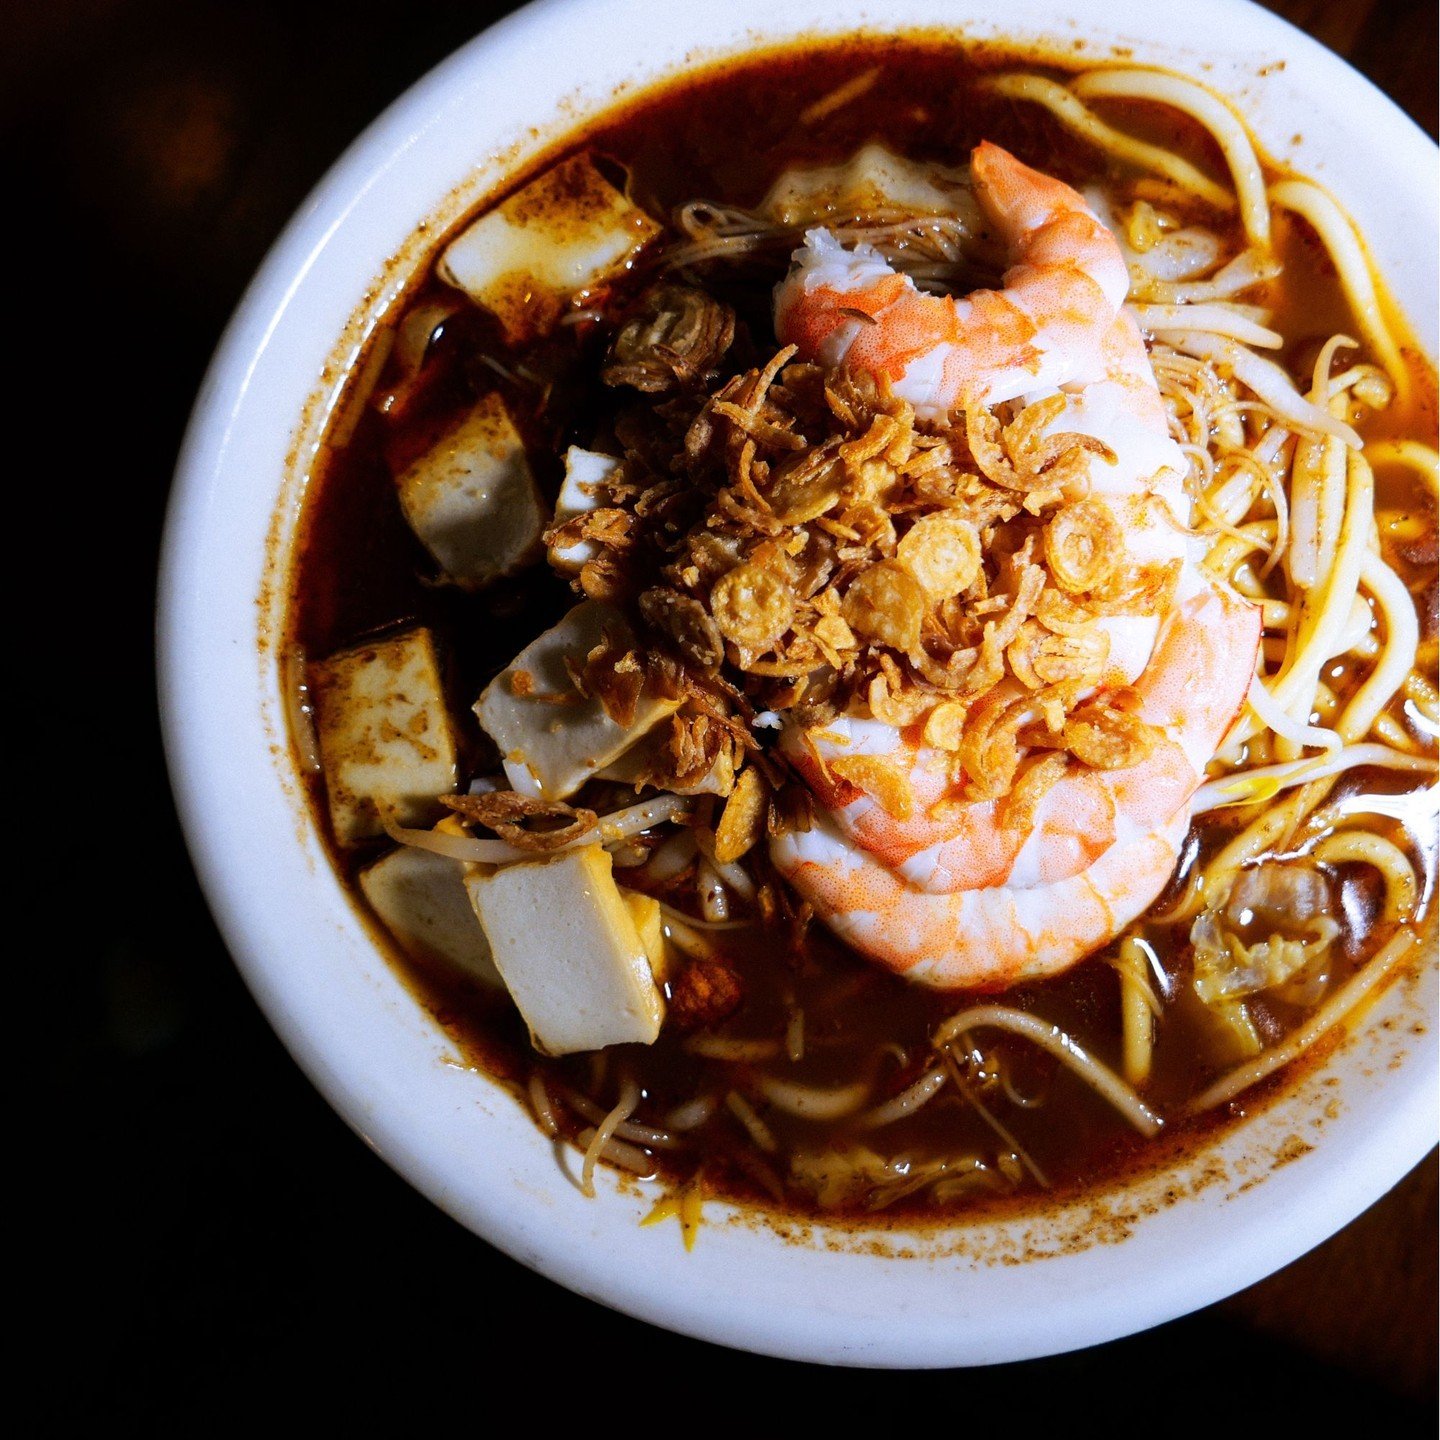 Prawn Noodle Soup - Intensely prawn-y broth served with your choice of noodles (yellow noodles, vermicelli, or a mix of broth) and topped with sliced prawns, fish cake, and fried shallots for a bit of crunch

(Available at both our locations)